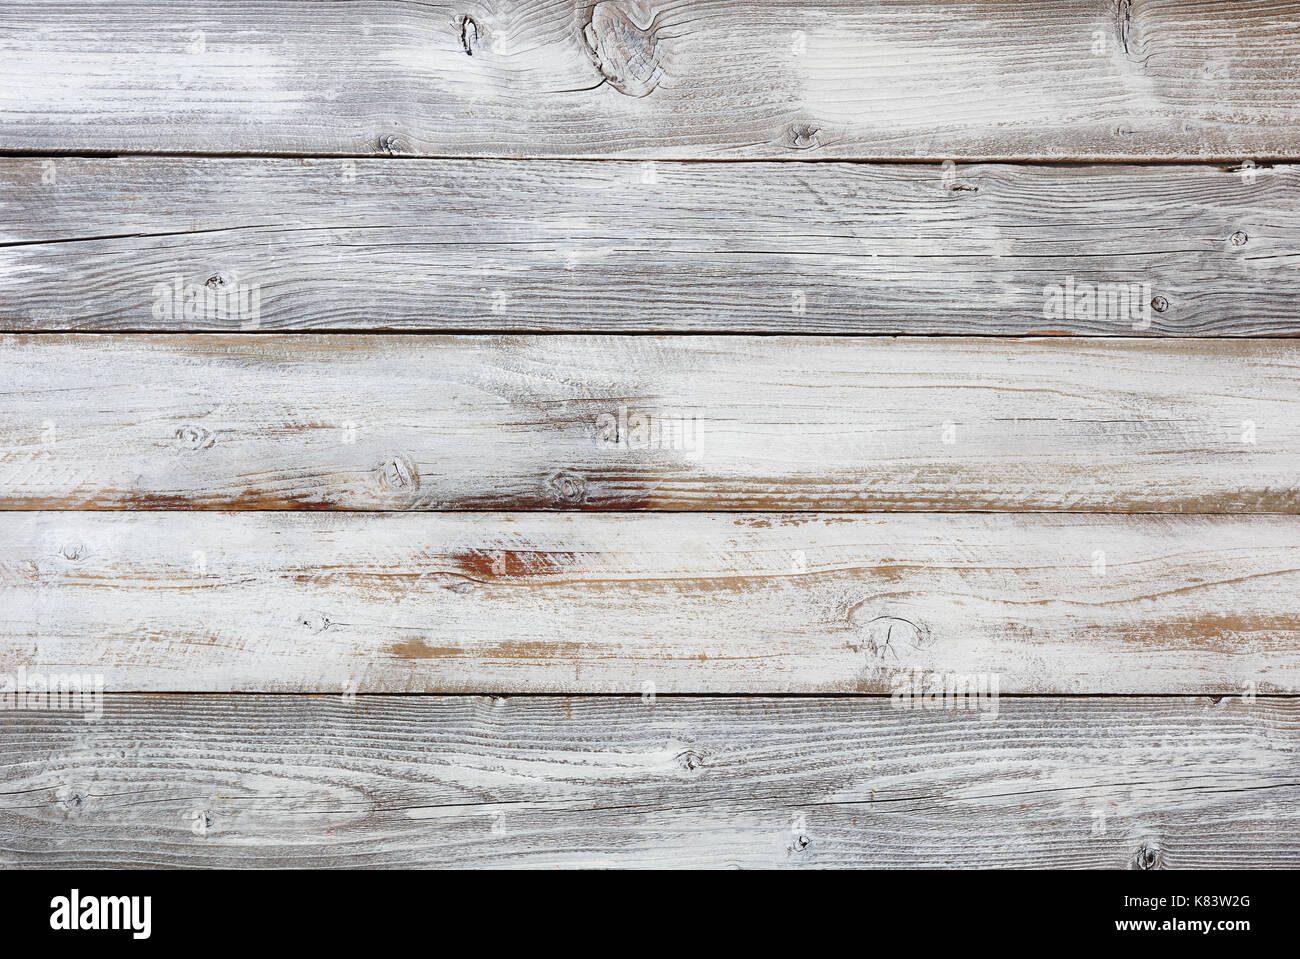 Reclaimed rustic wood background Stock Photo